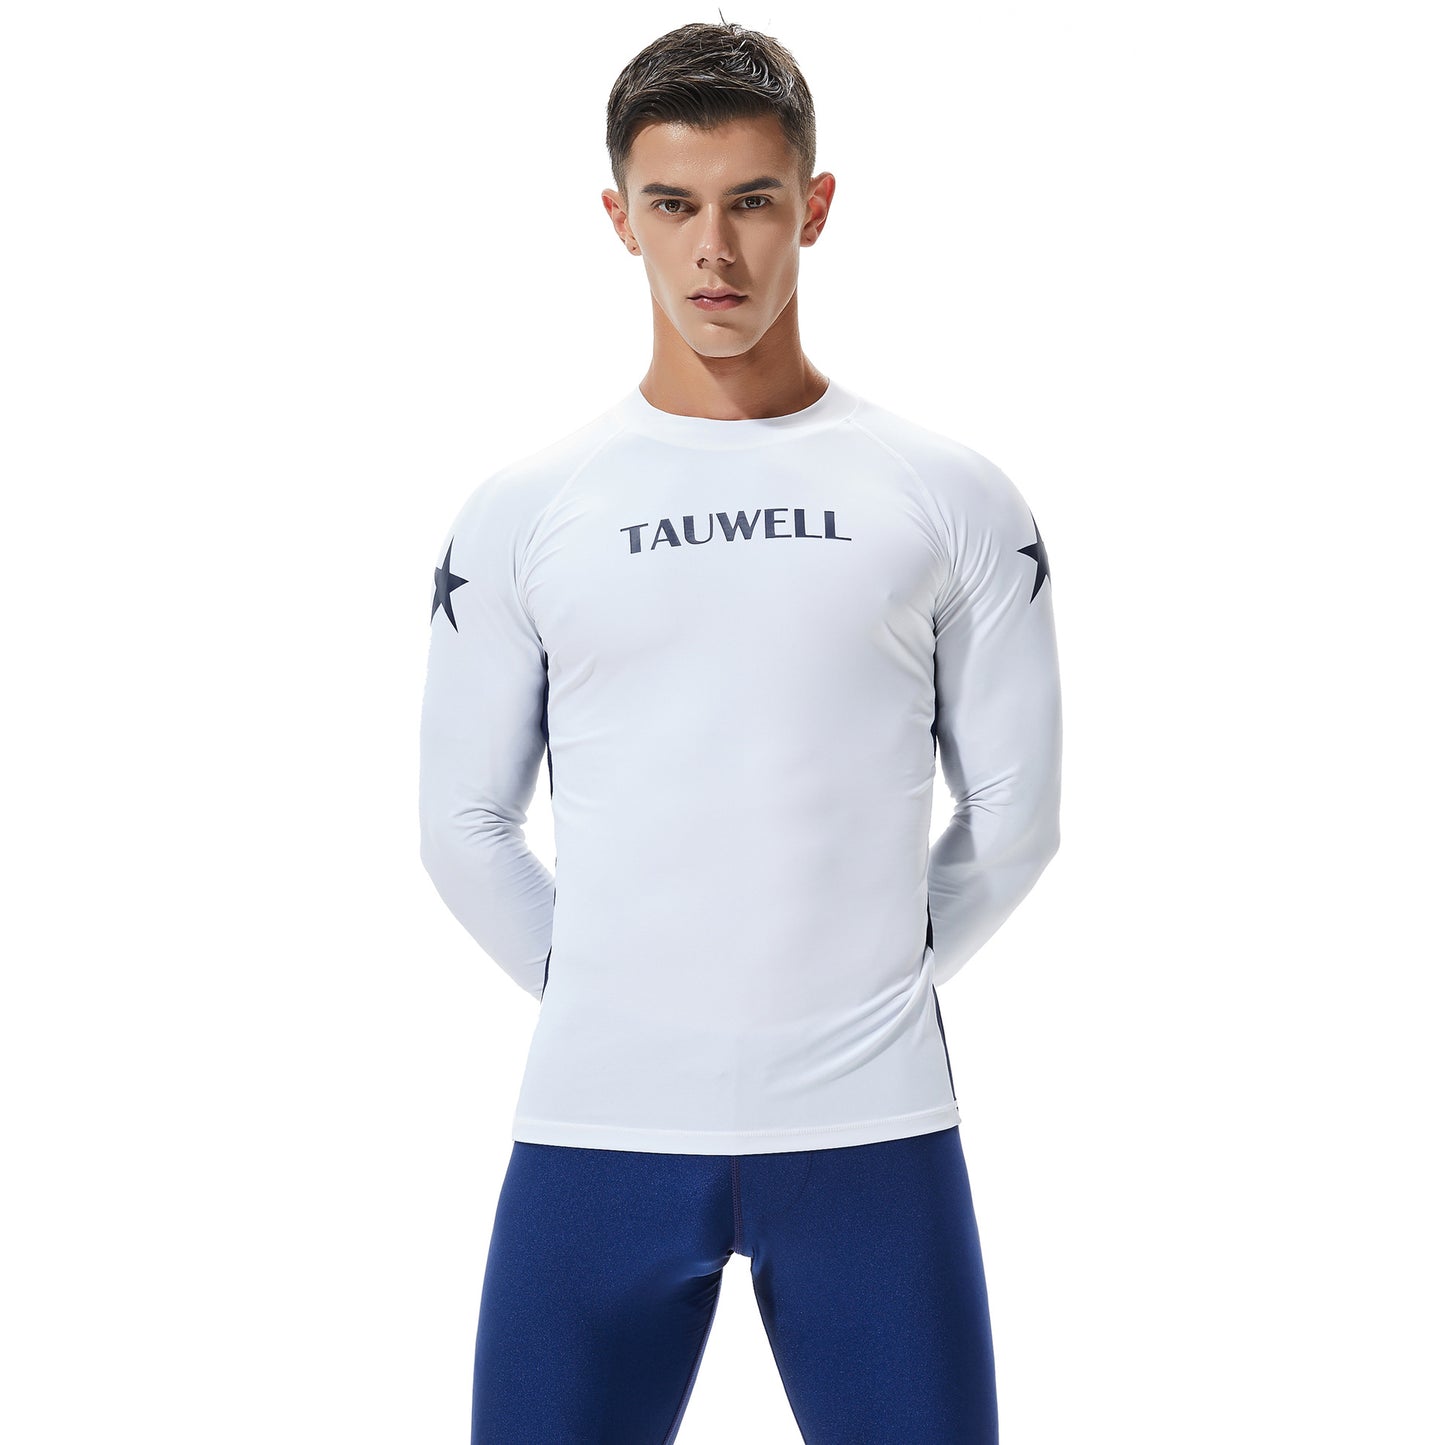 Men's Surfing Suit Sunscreen Personalized Swimsuit